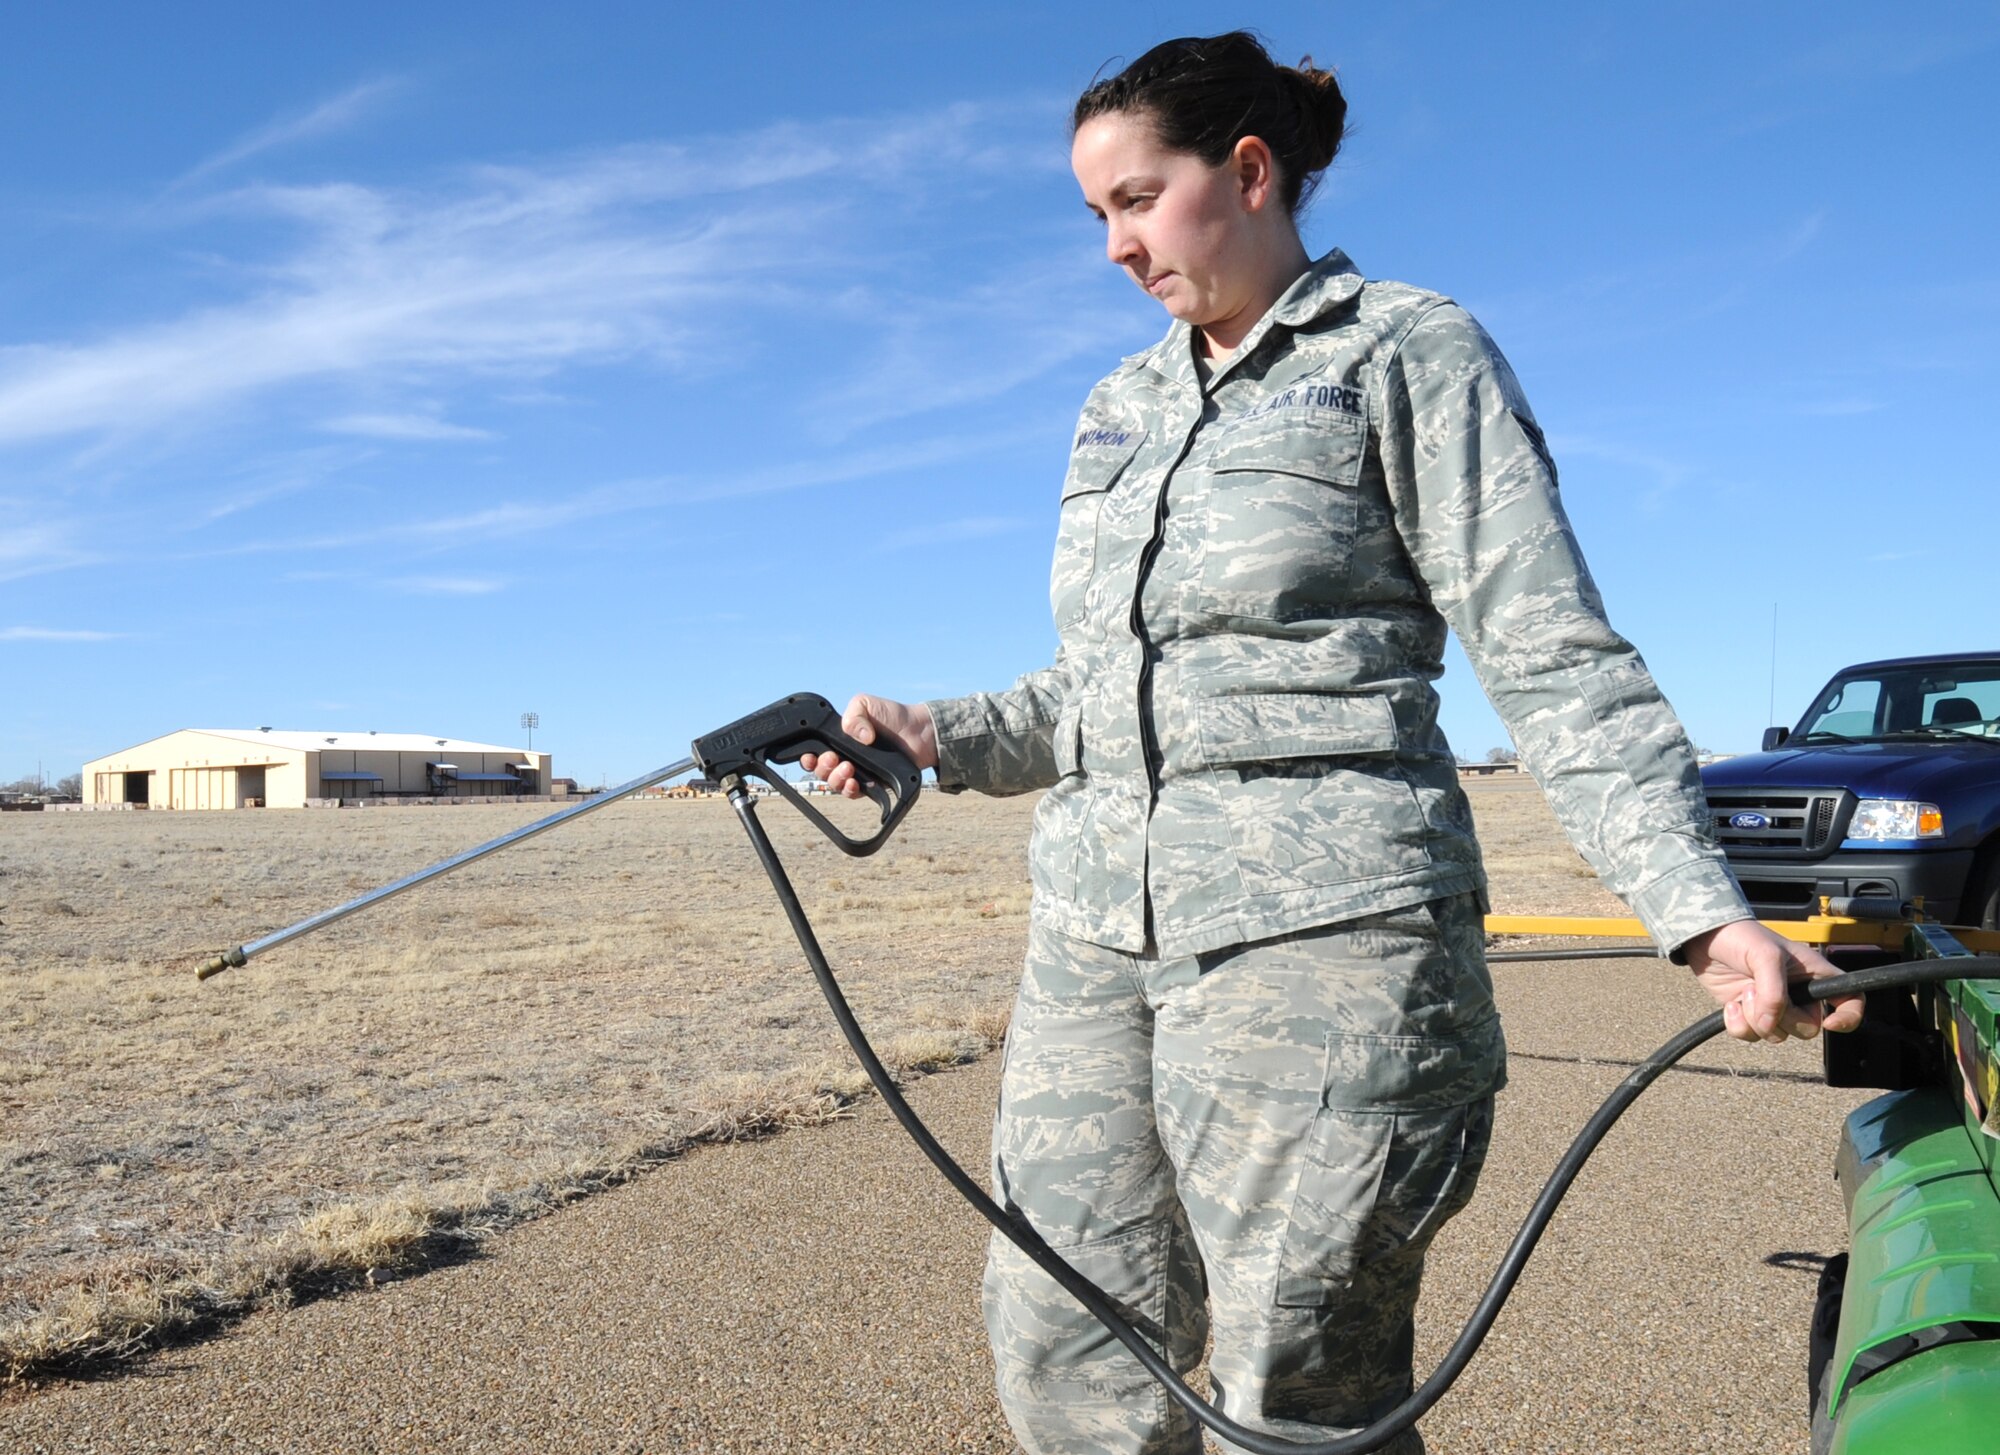 U.S. Air Force Senior Airman C?Belle Tennimon sprays weed killer near the flightline at Cannon Air Force Base, N.M., Feb. 1, 2012. Tennimon is a pest manager who routinely deals with public health concerns at Cannon. (U.S. Air Force photo by Airman 1st Class Alexxis Pons Abascal)  